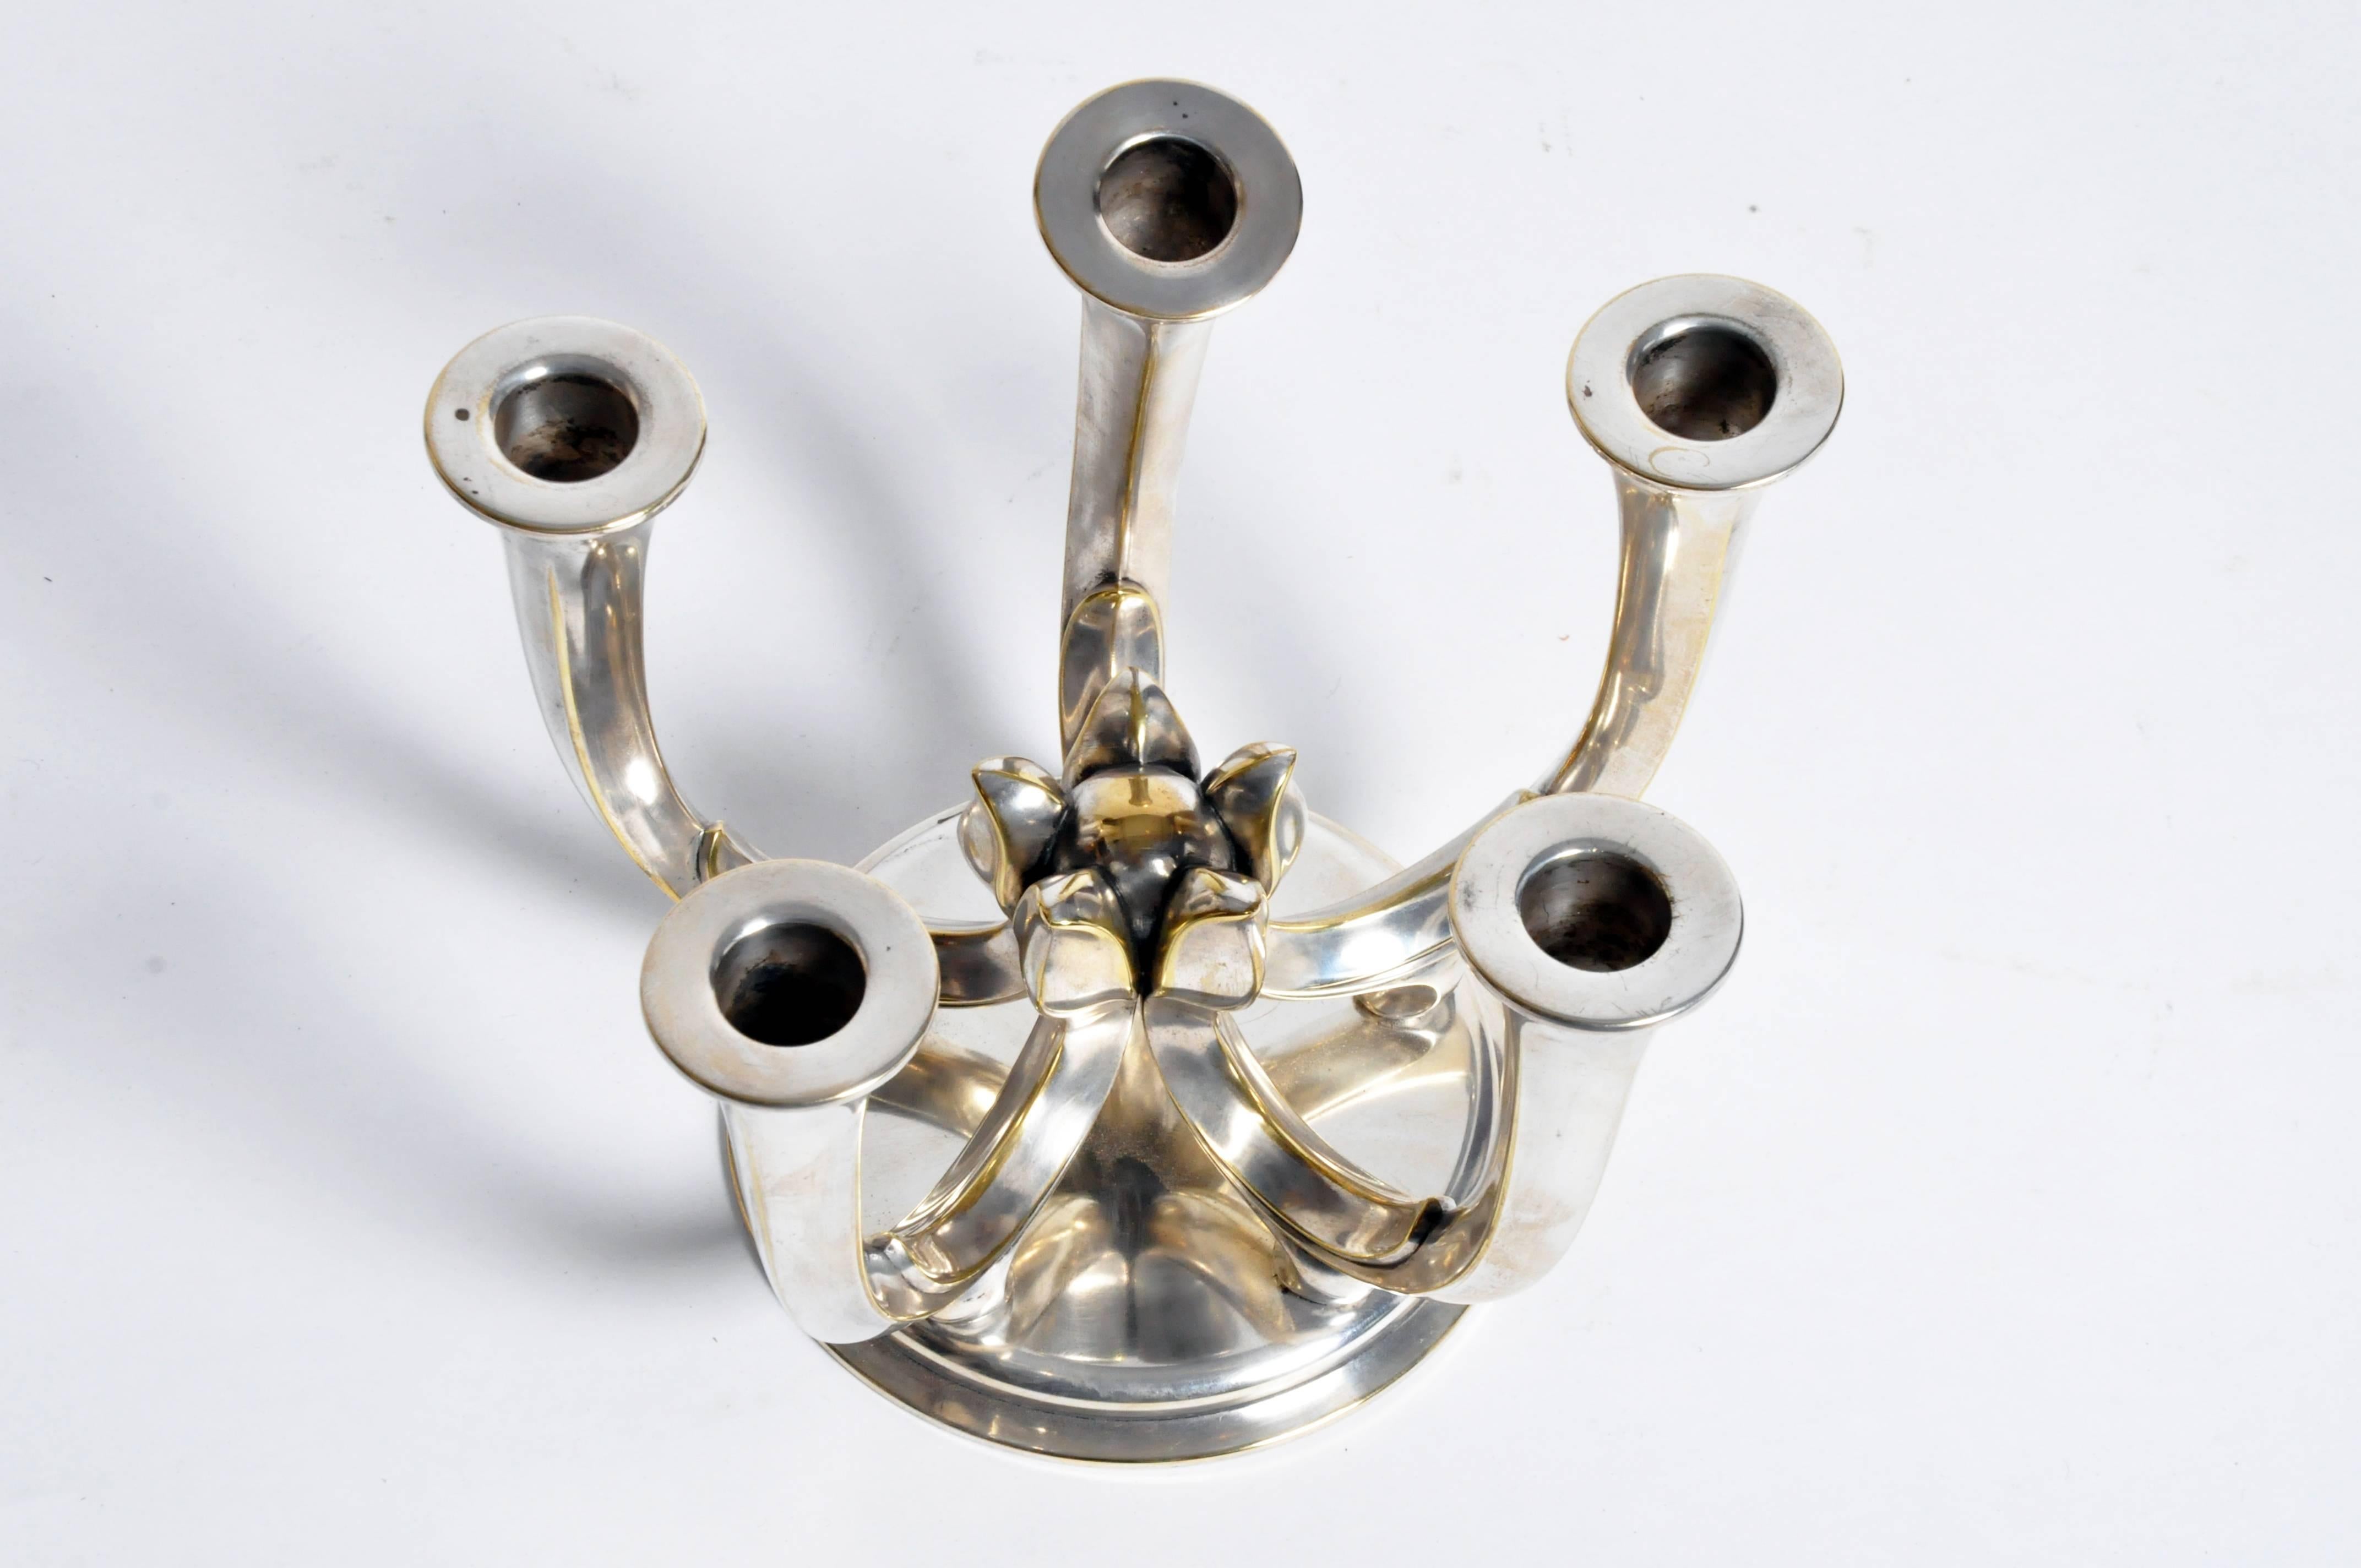 This elegant candleholder is from Budapest, Hungary and is made from metal, circa 1920.